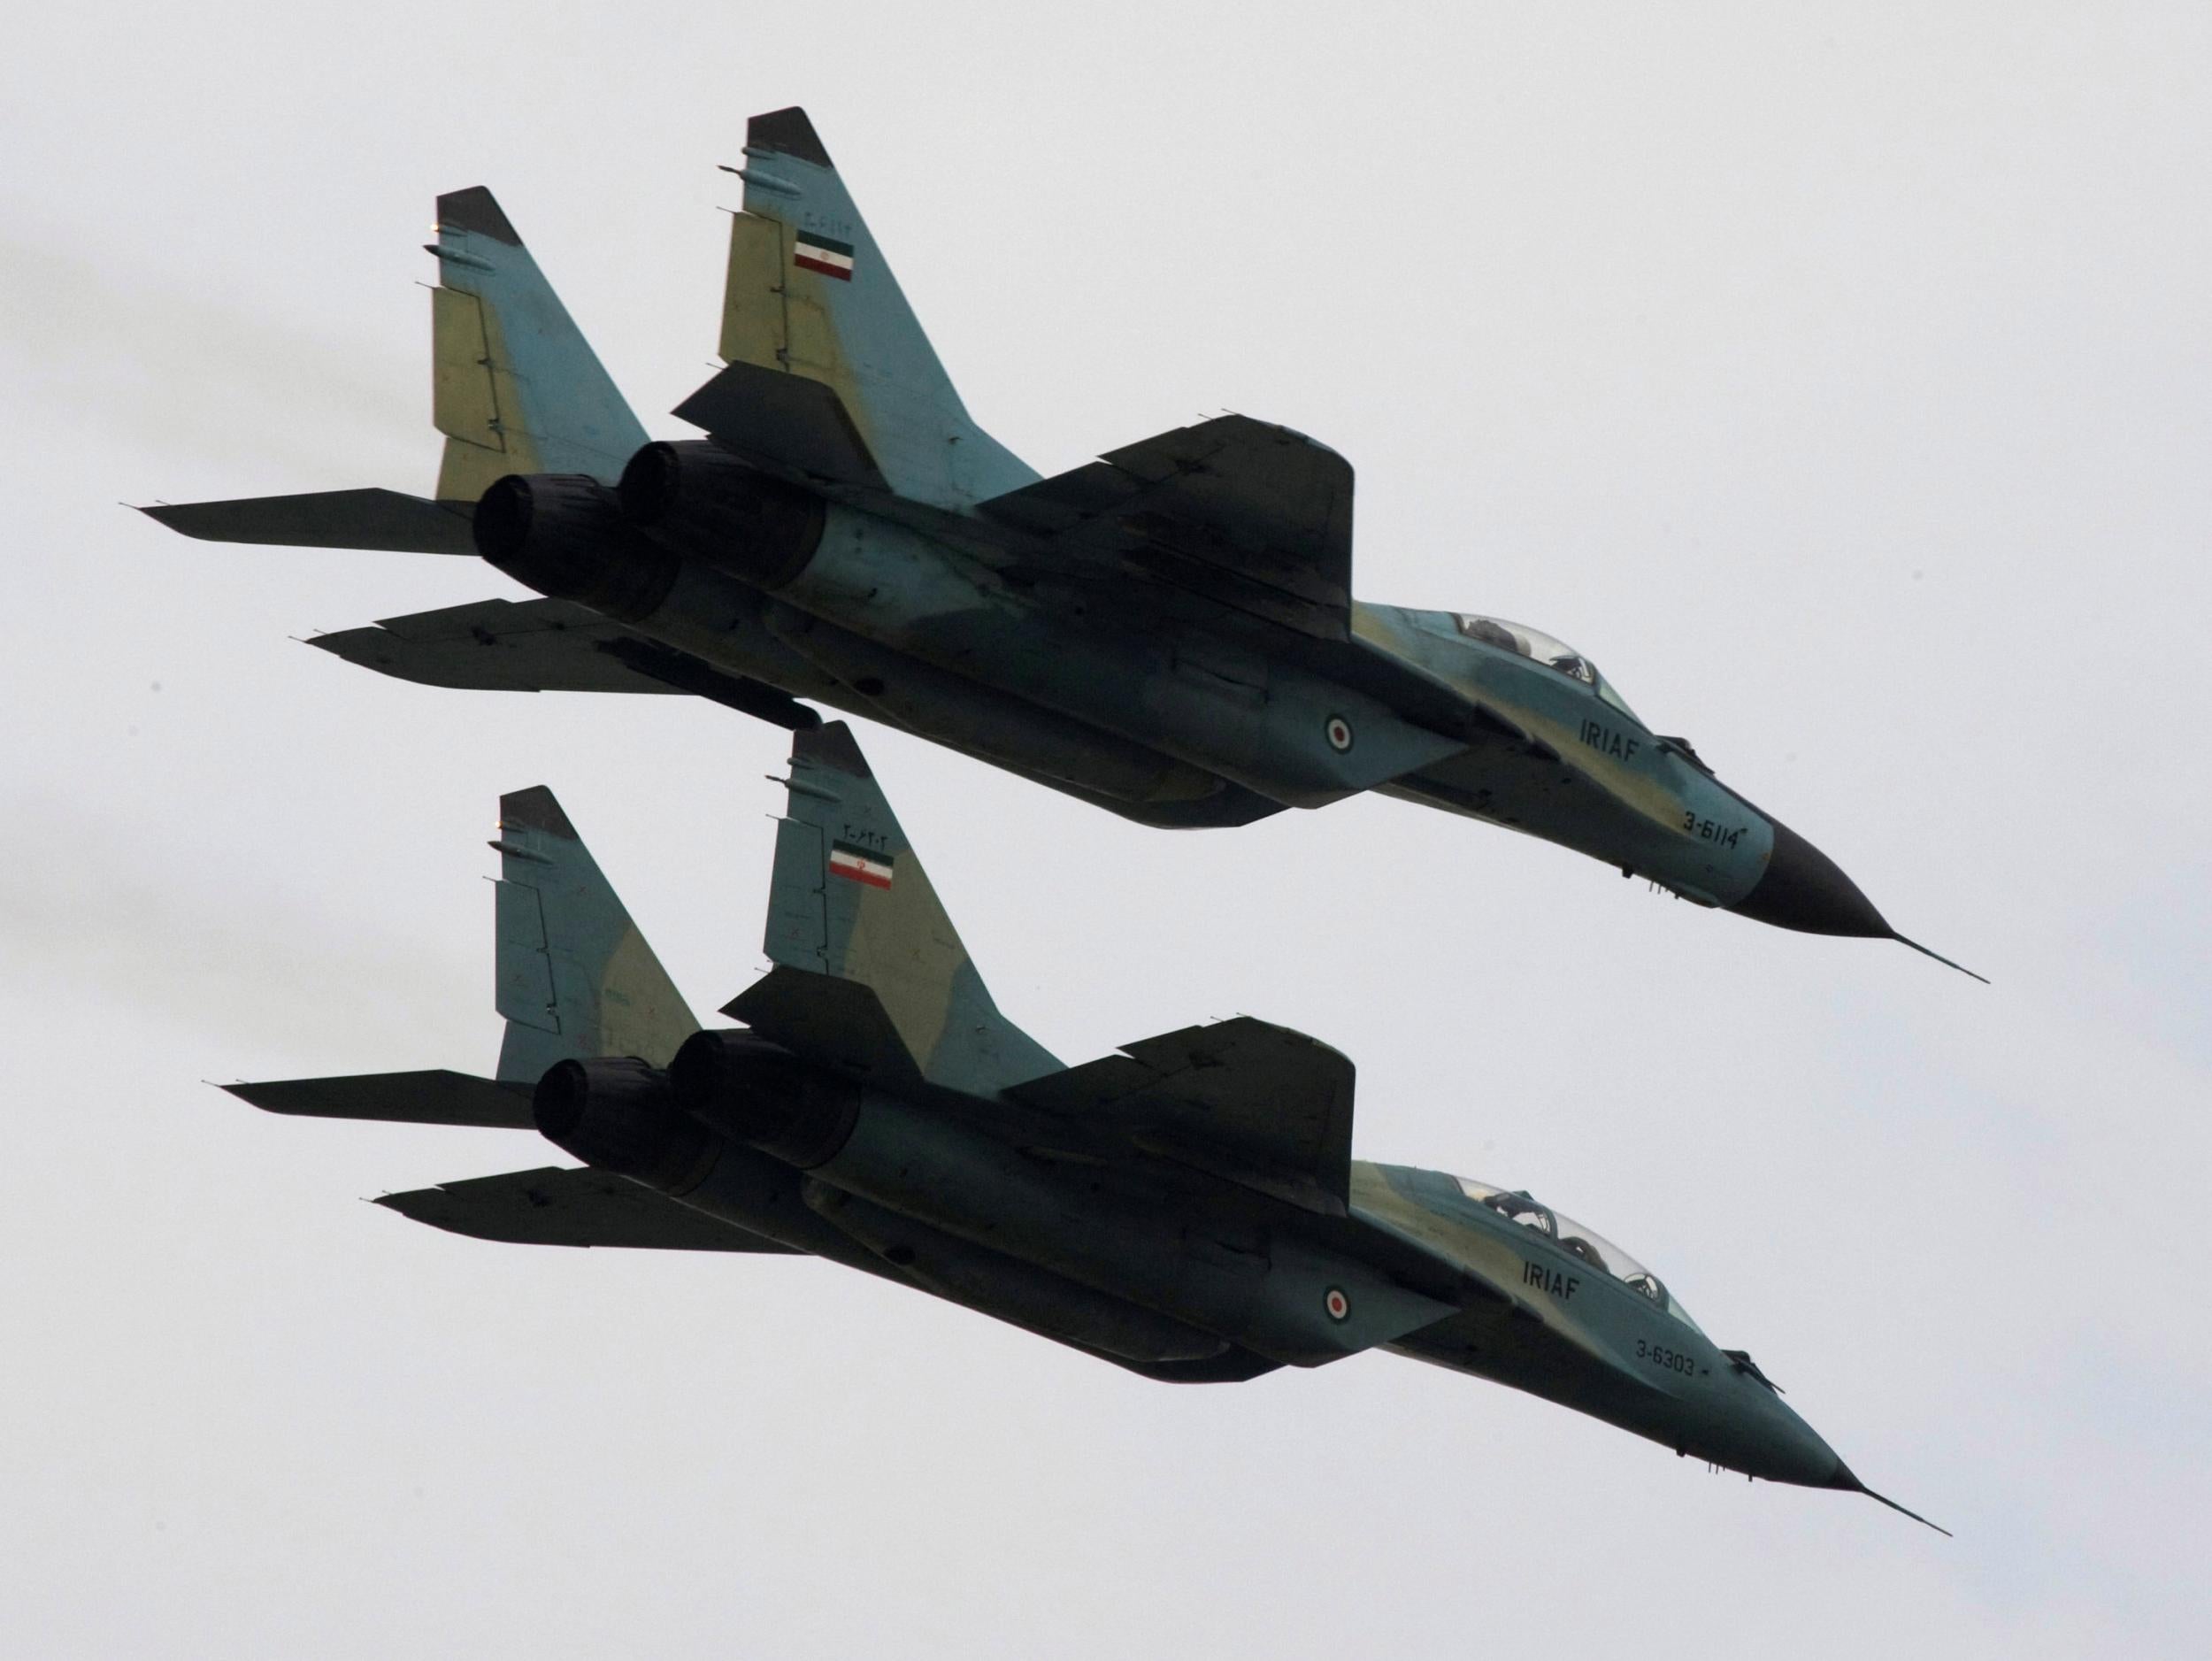 Tehran flew Russian Sukhoi-22 planes over the Strait of Hormuz as a warning to its enemies